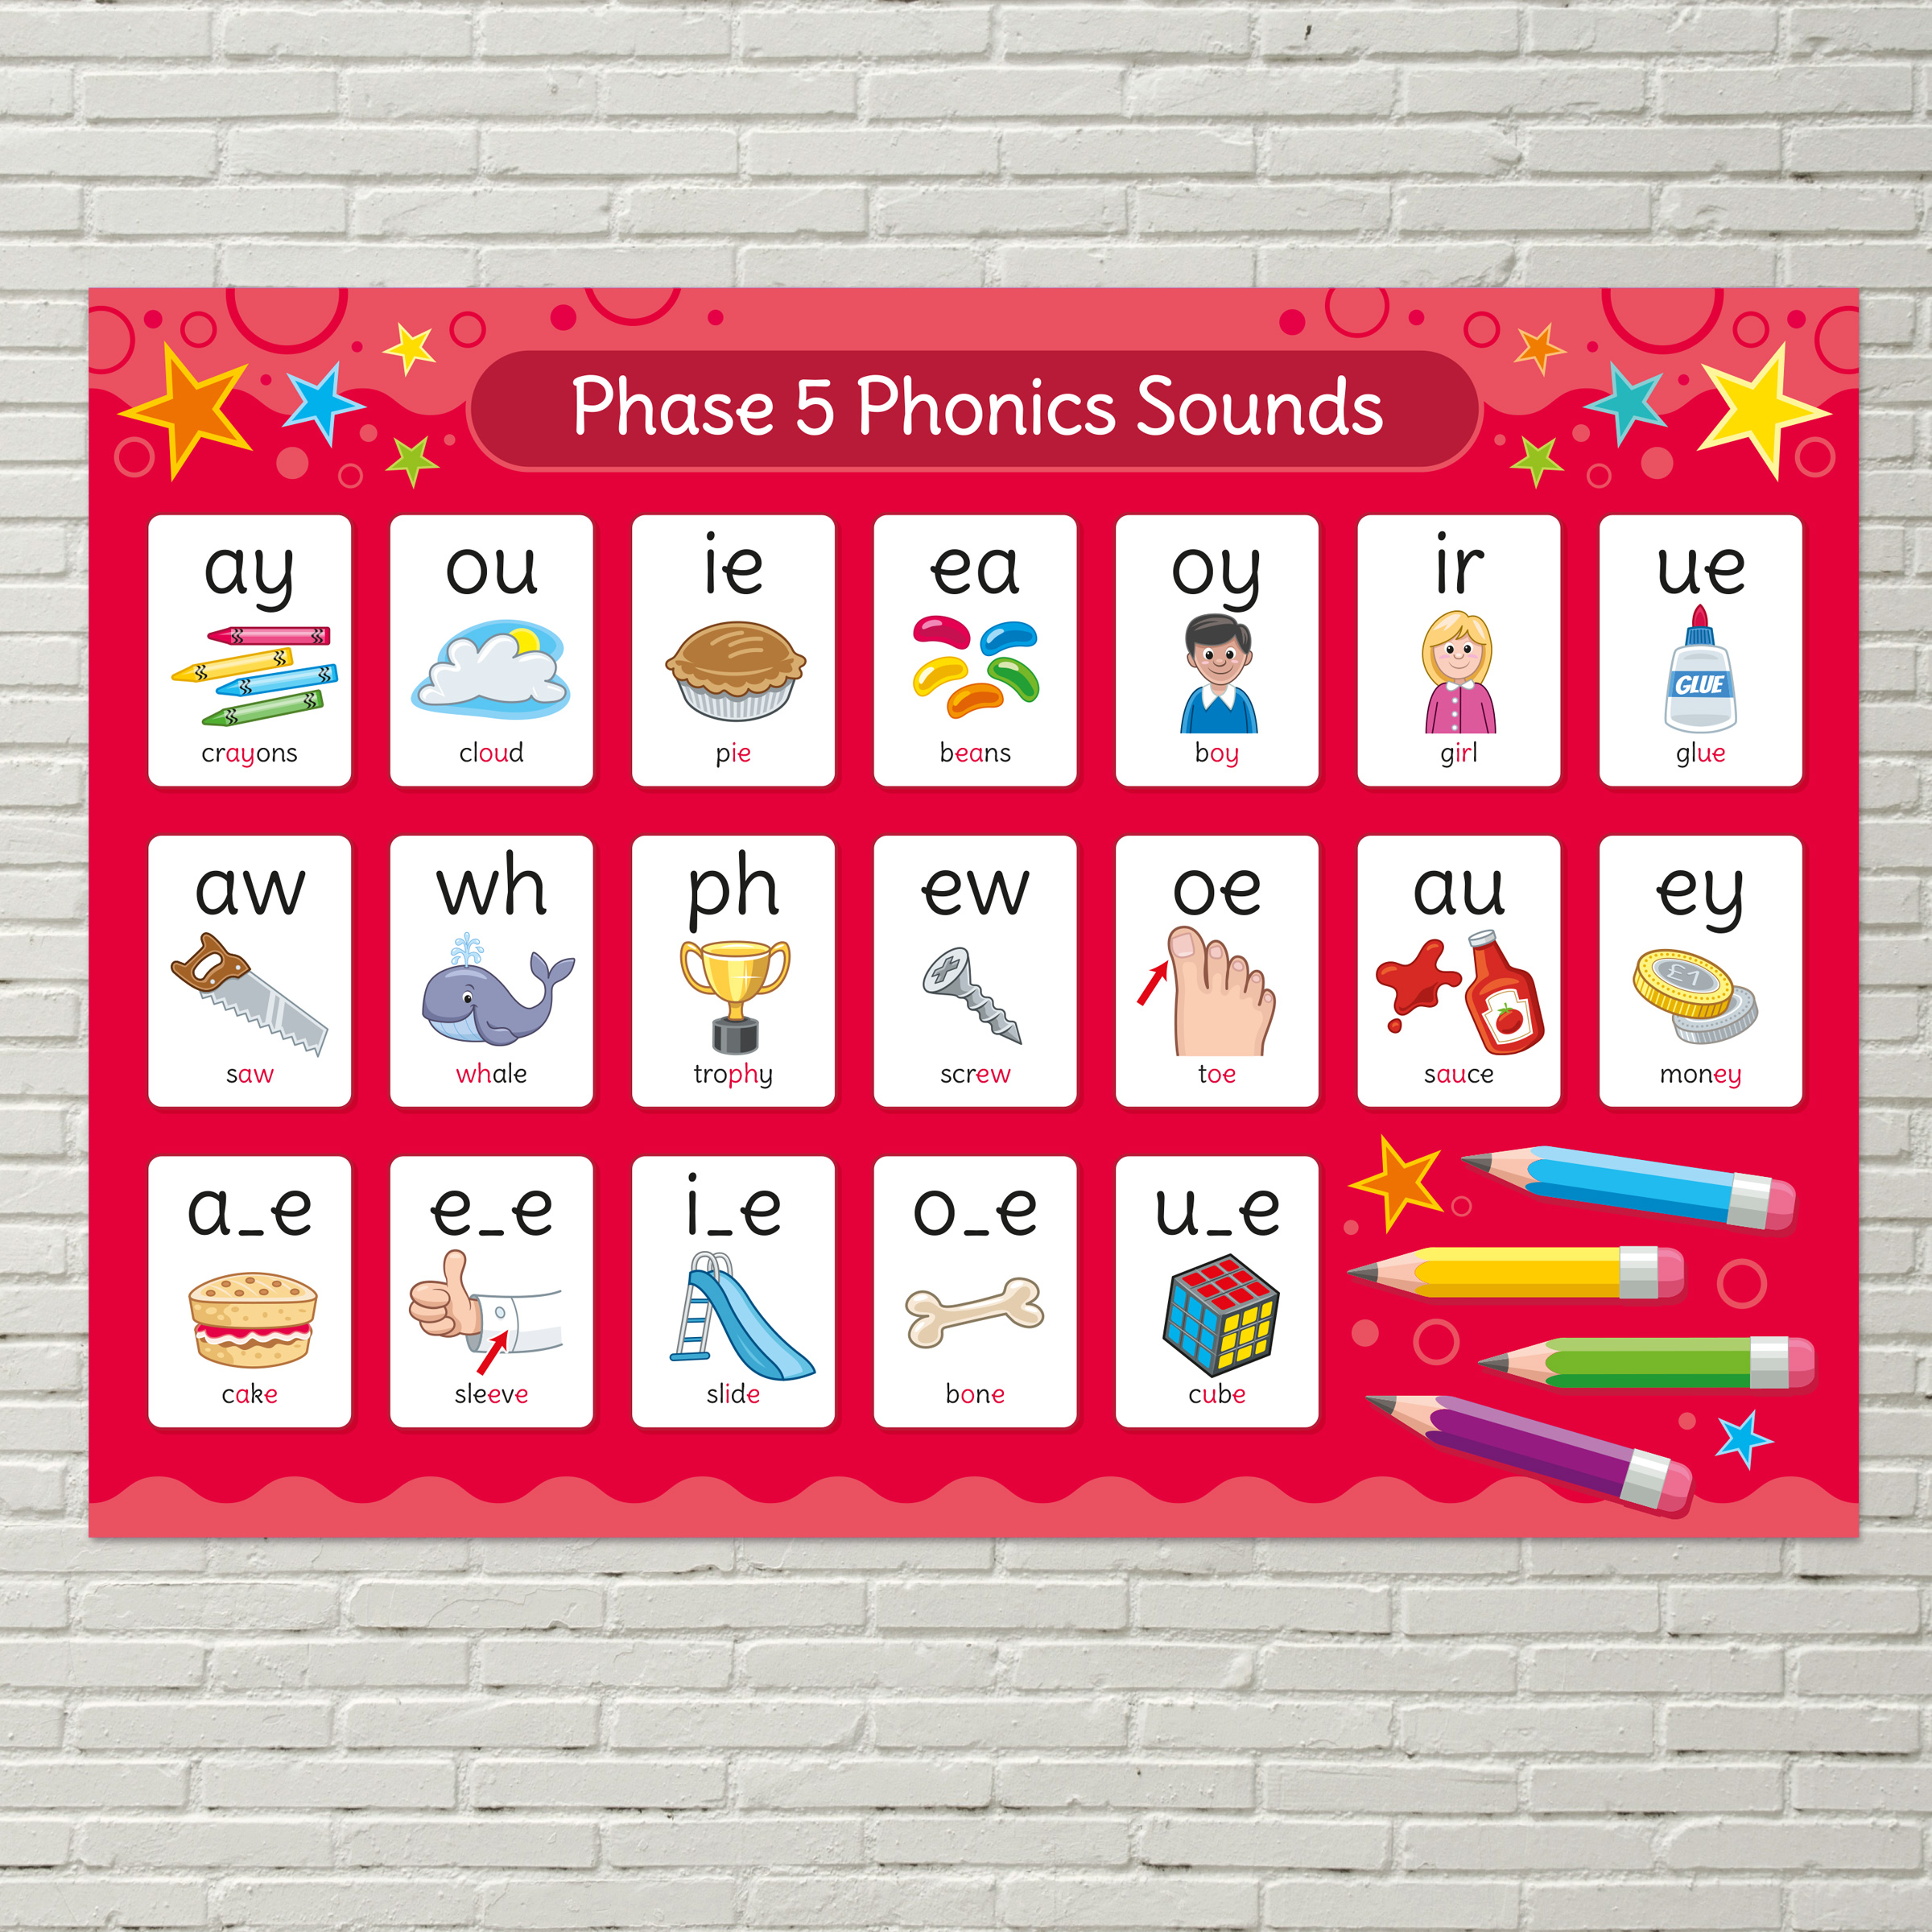 phonics-phase-5-sounds-poster-english-poster-for-schools